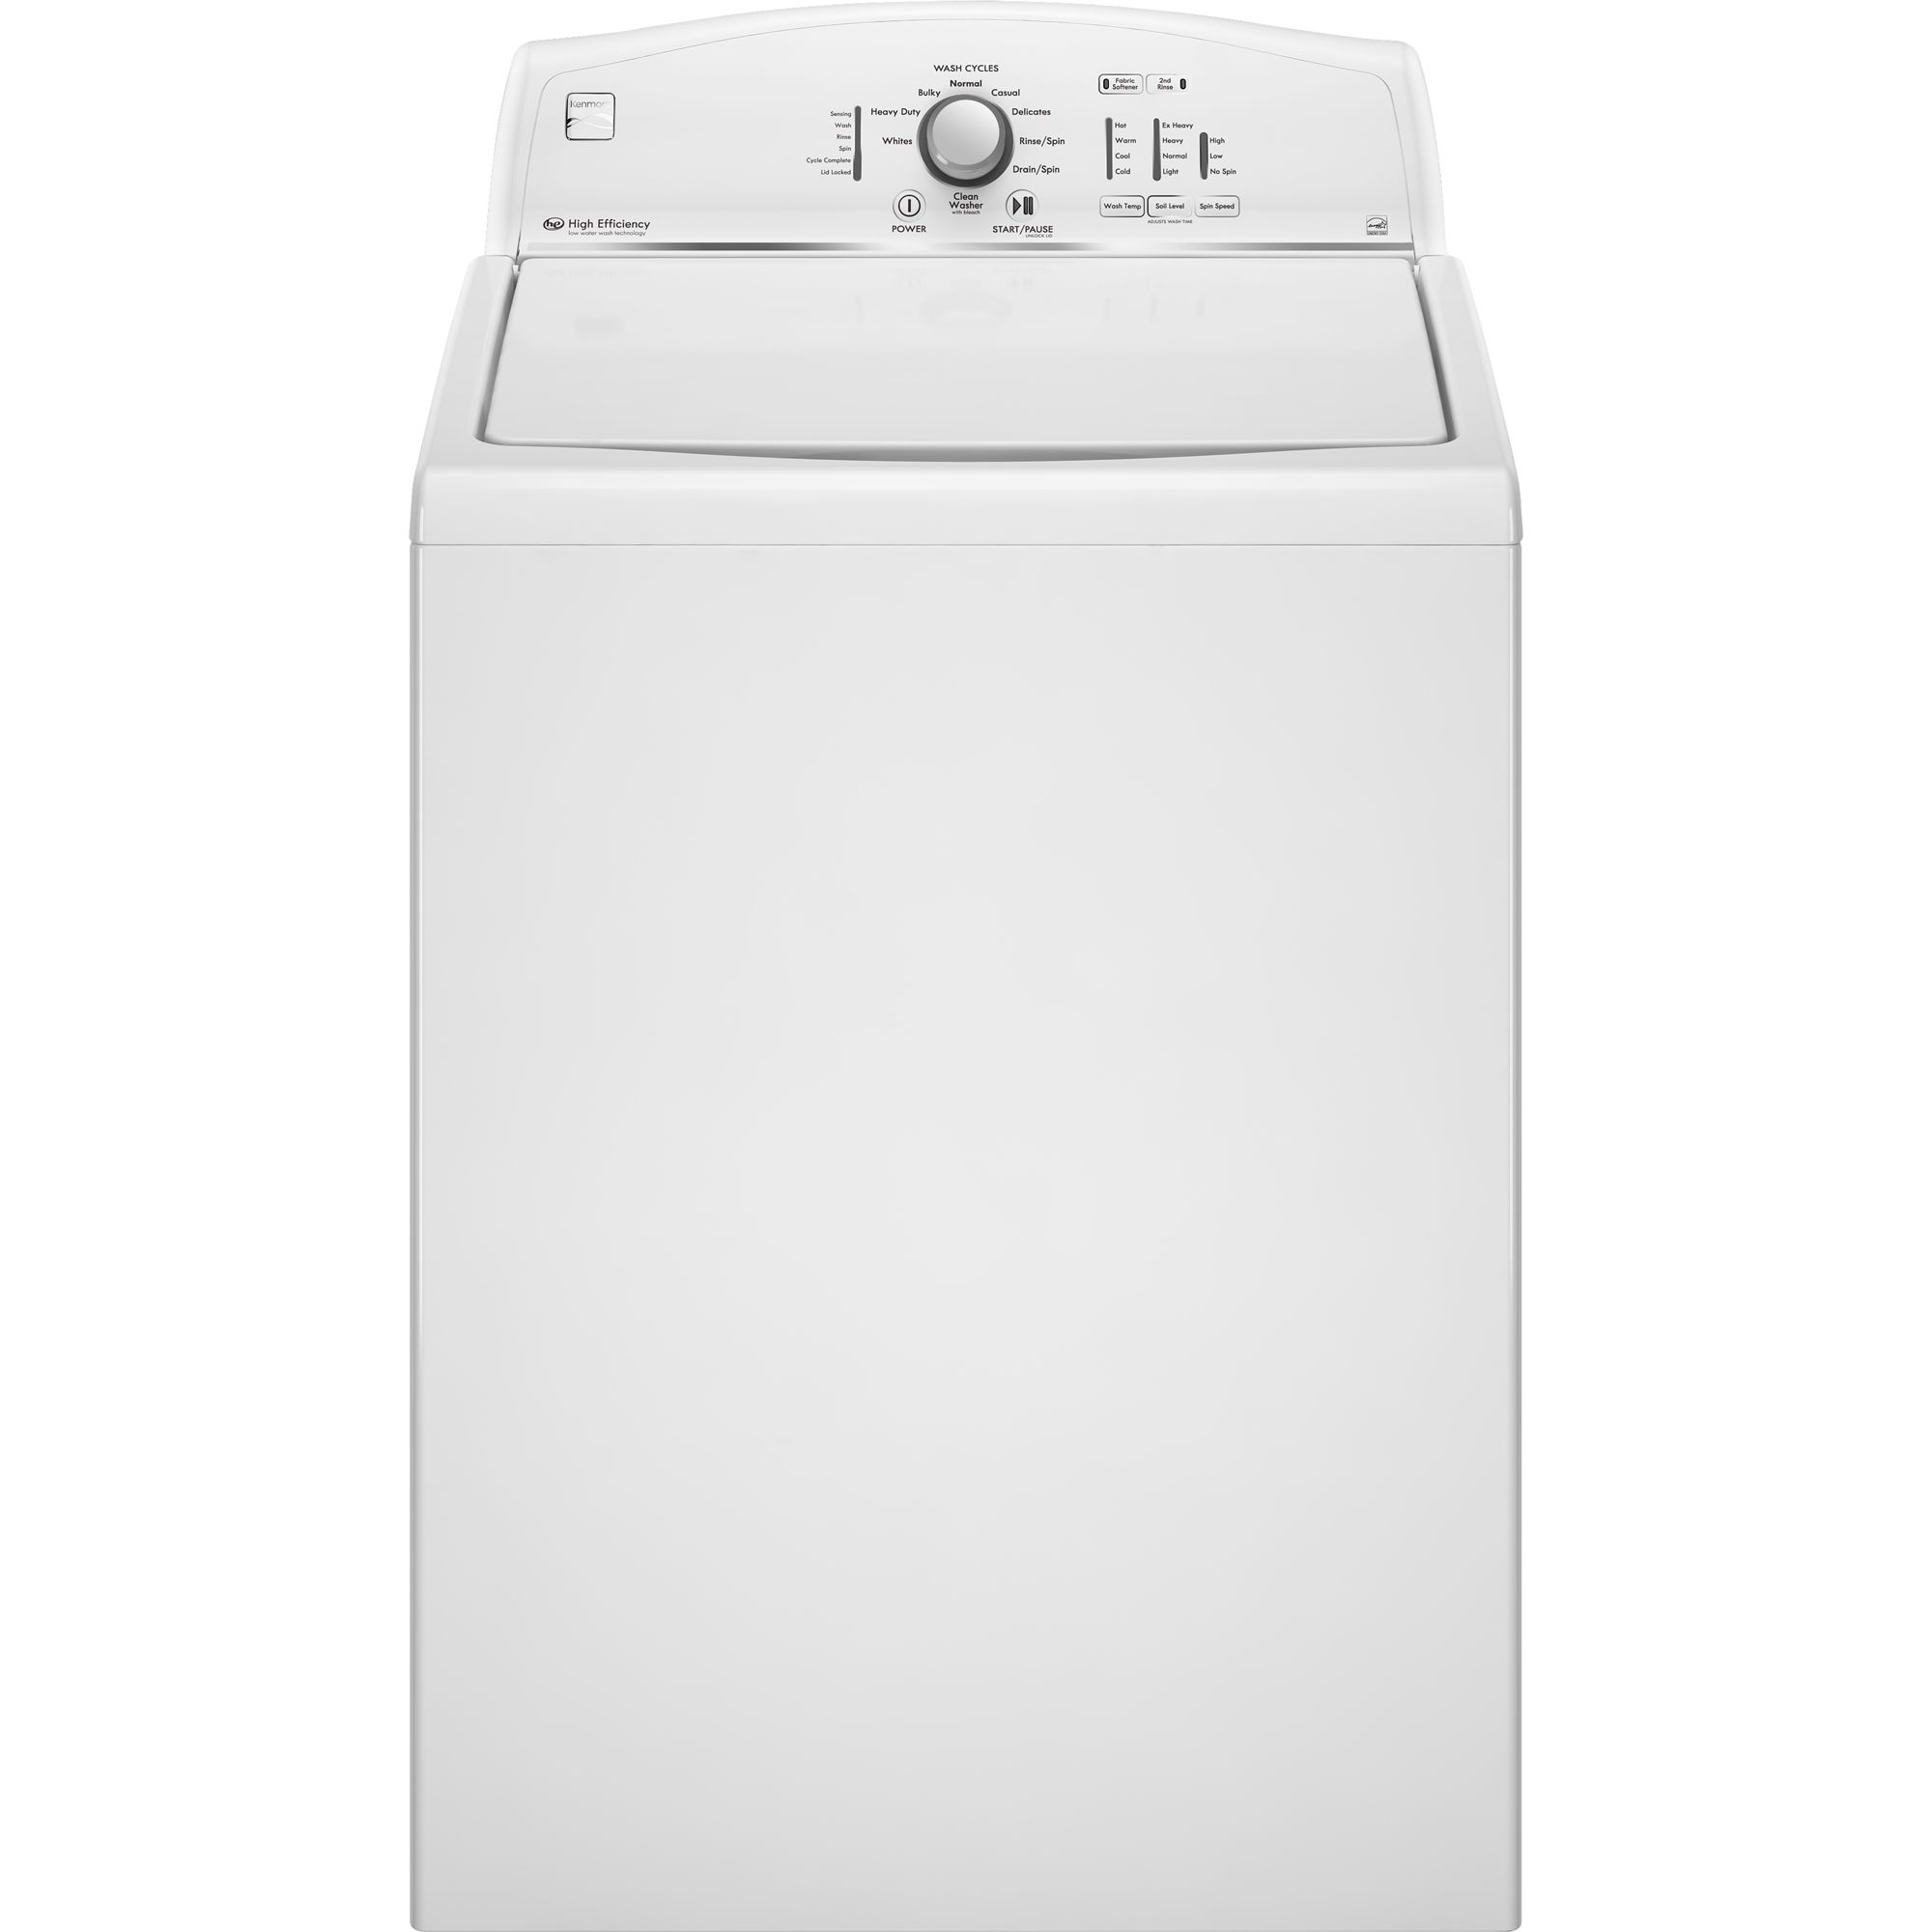 Kenmore 3.6 cu. ft. High-Efficiency Top-Load Washer